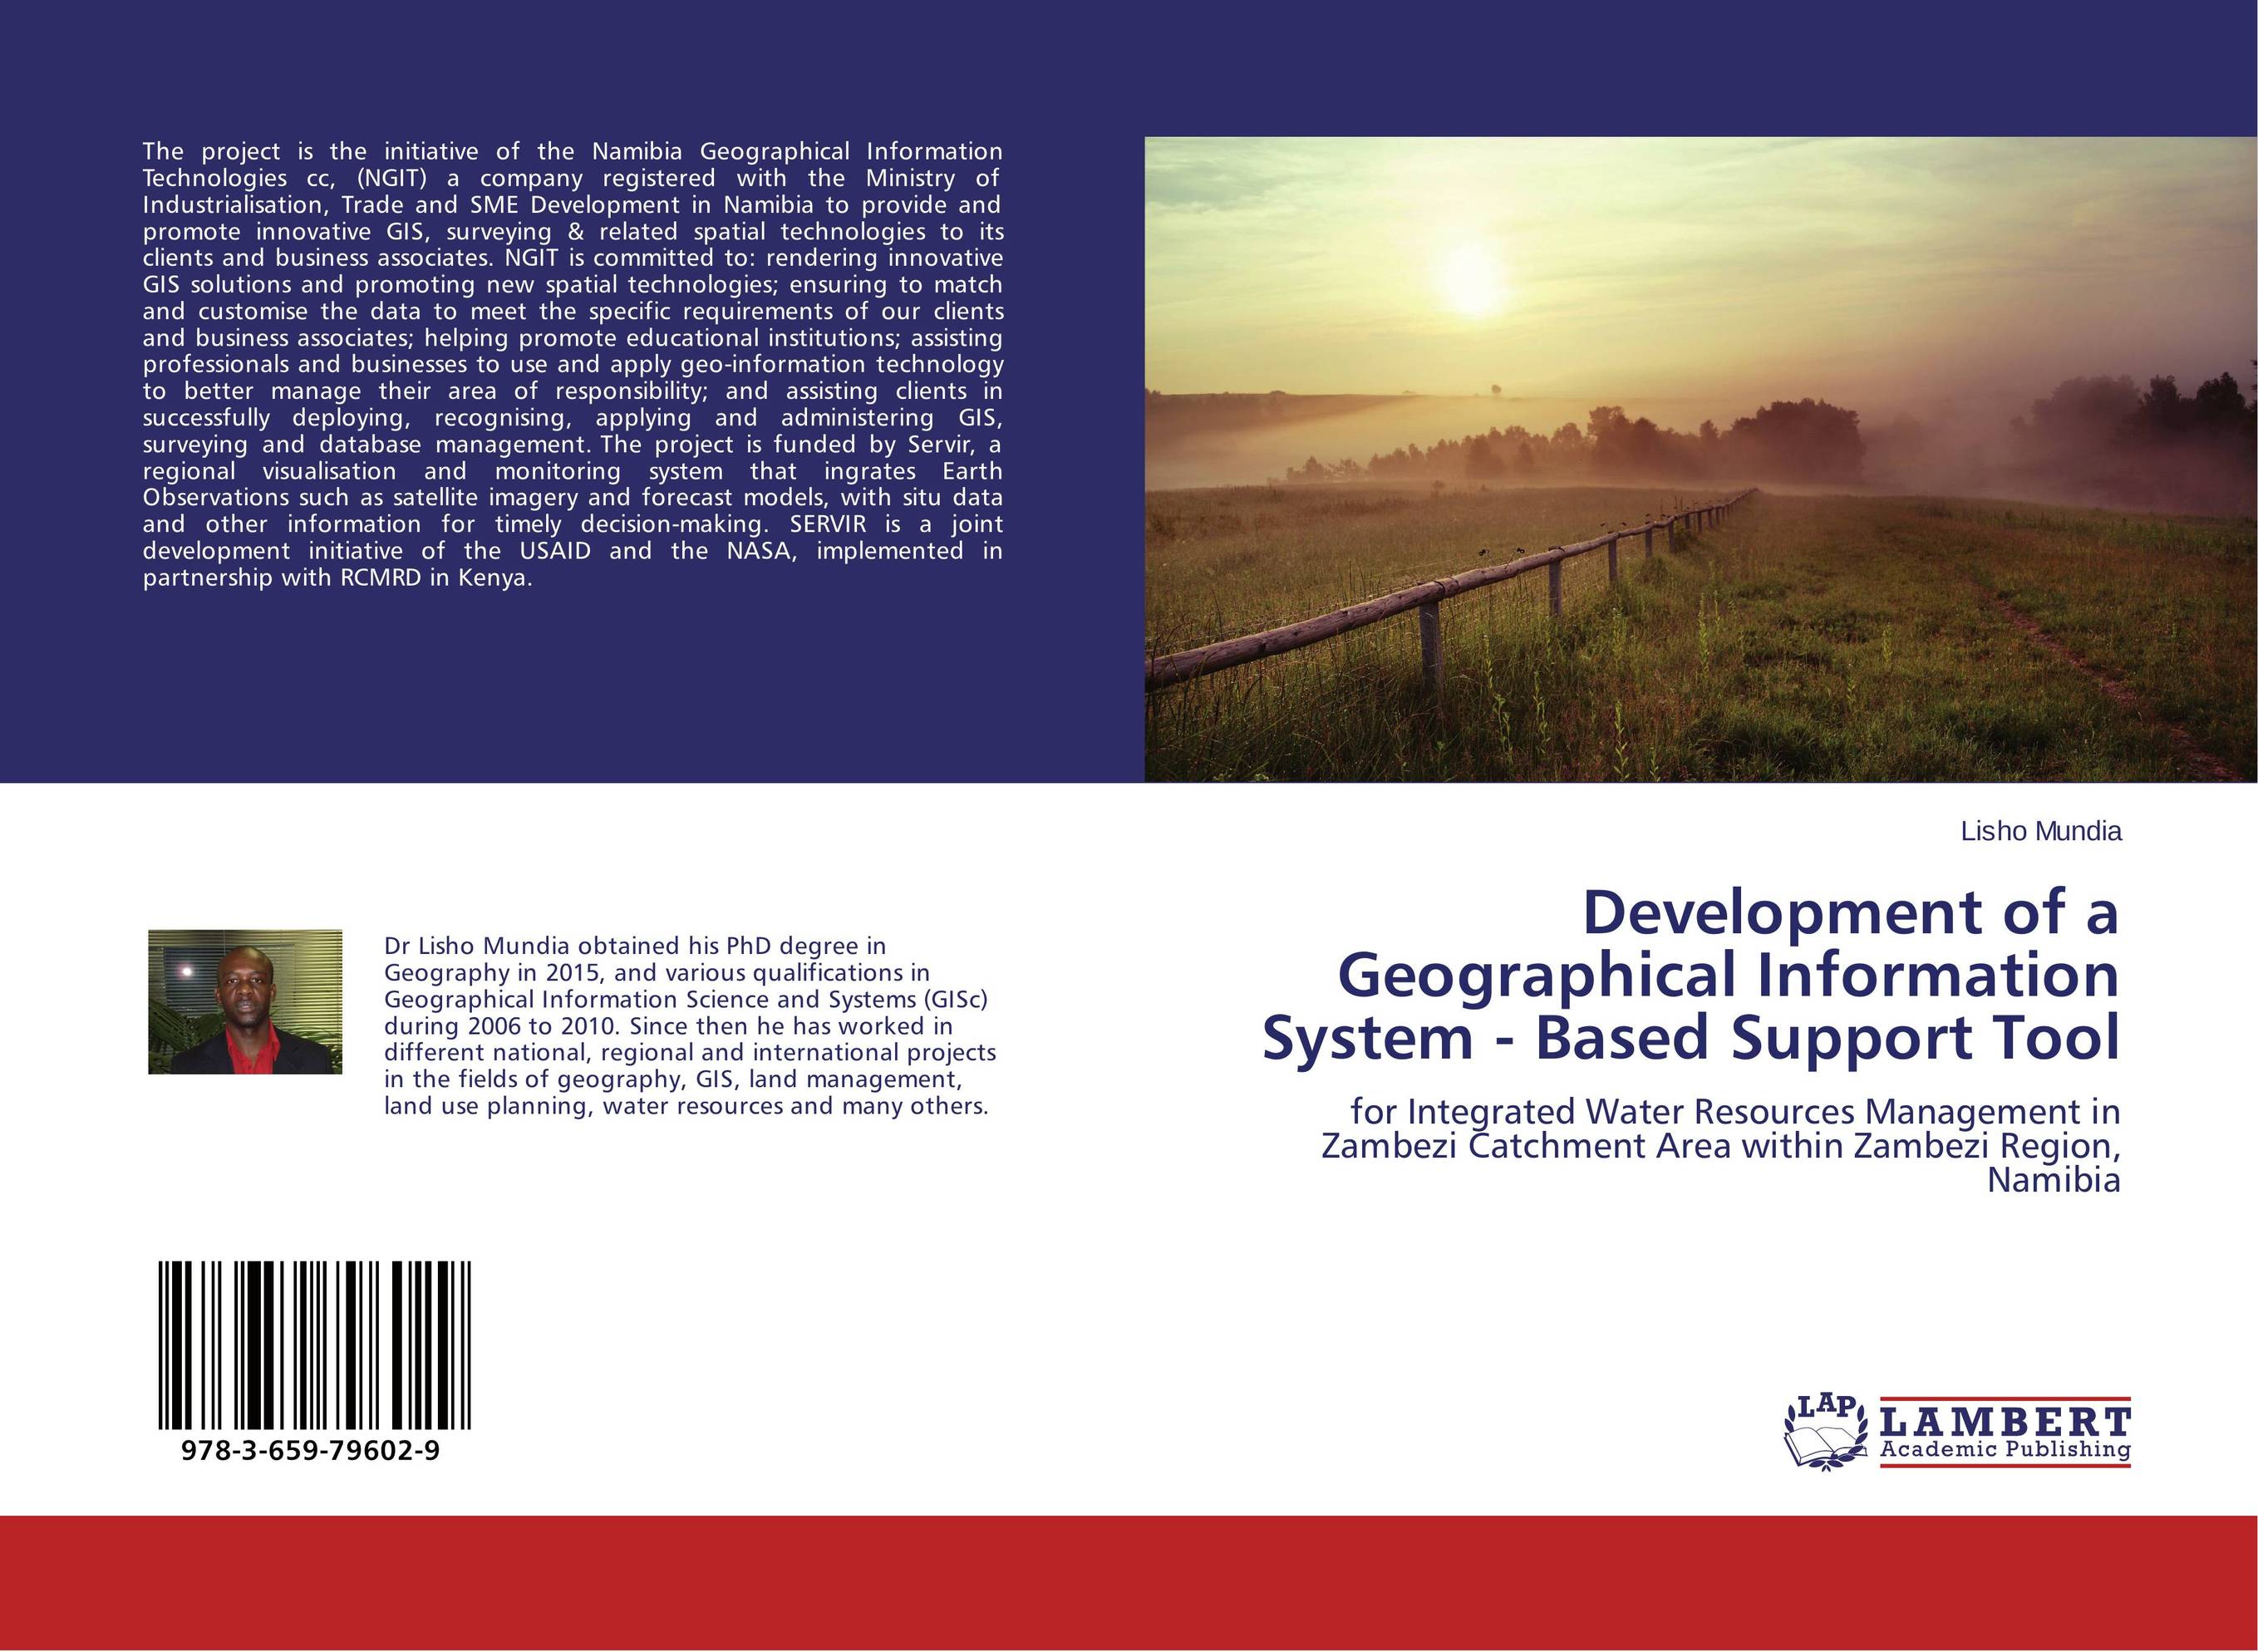 Development of a Geographical Information System - Based Support Tool